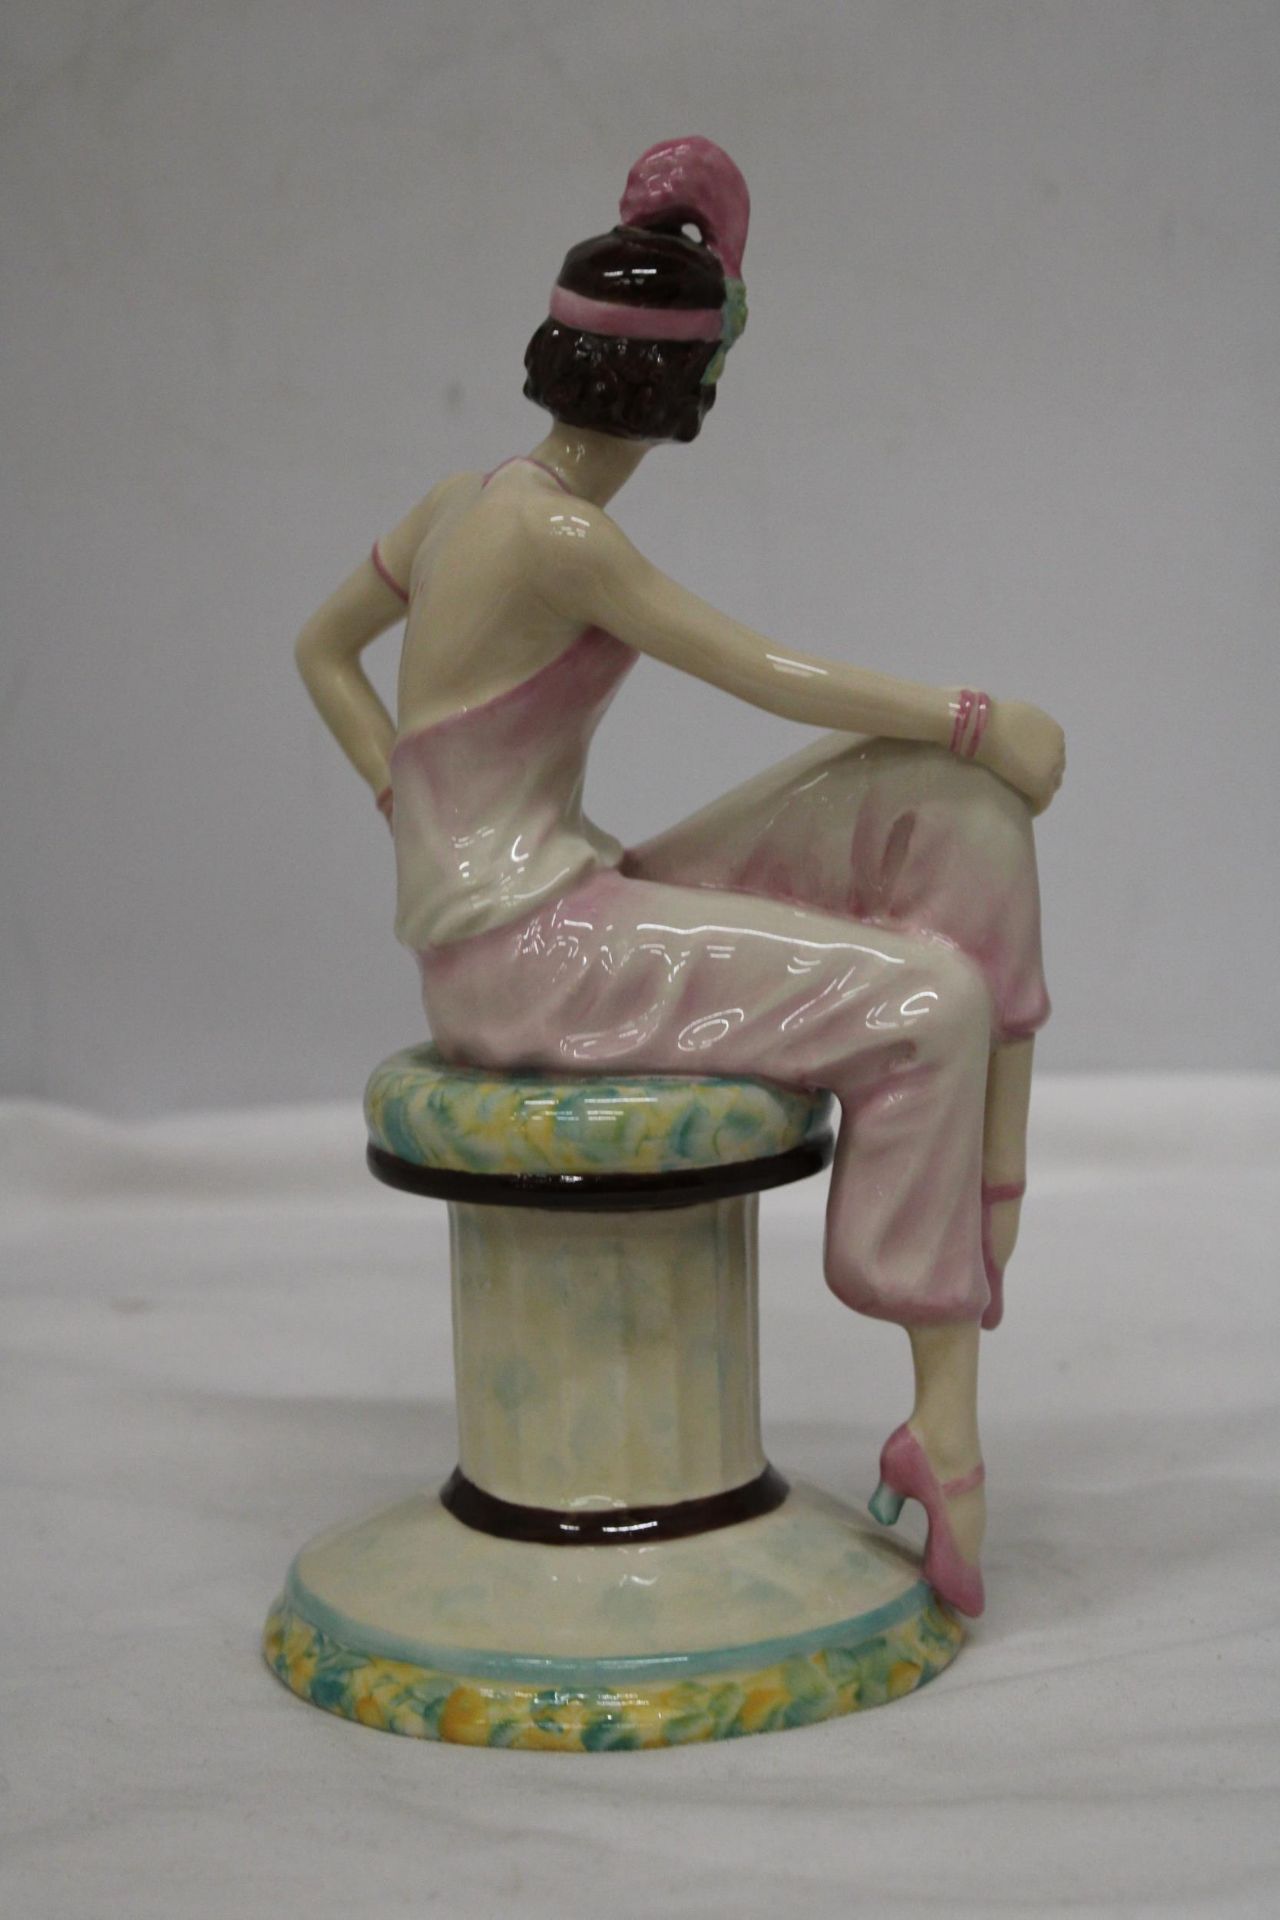 A LIMITED EDITIONM PEGGY DAVIS 'DANIELLE' FIGURINE (SIGNED IN GOLD) - Image 4 of 5